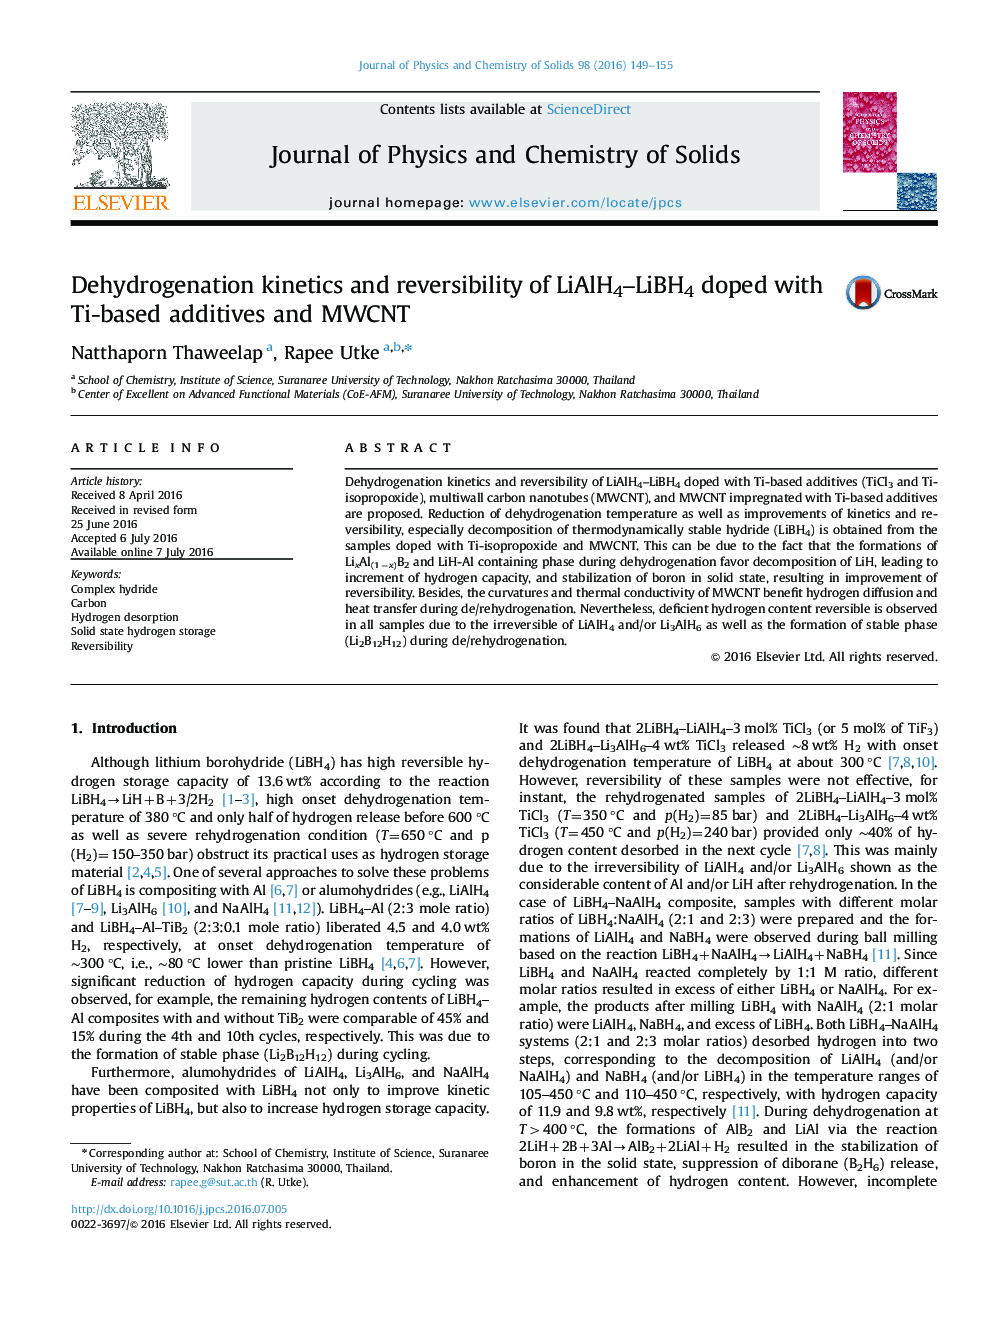 Dehydrogenation kinetics and reversibility of LiAlH4–LiBH4 doped with Ti-based additives and MWCNT